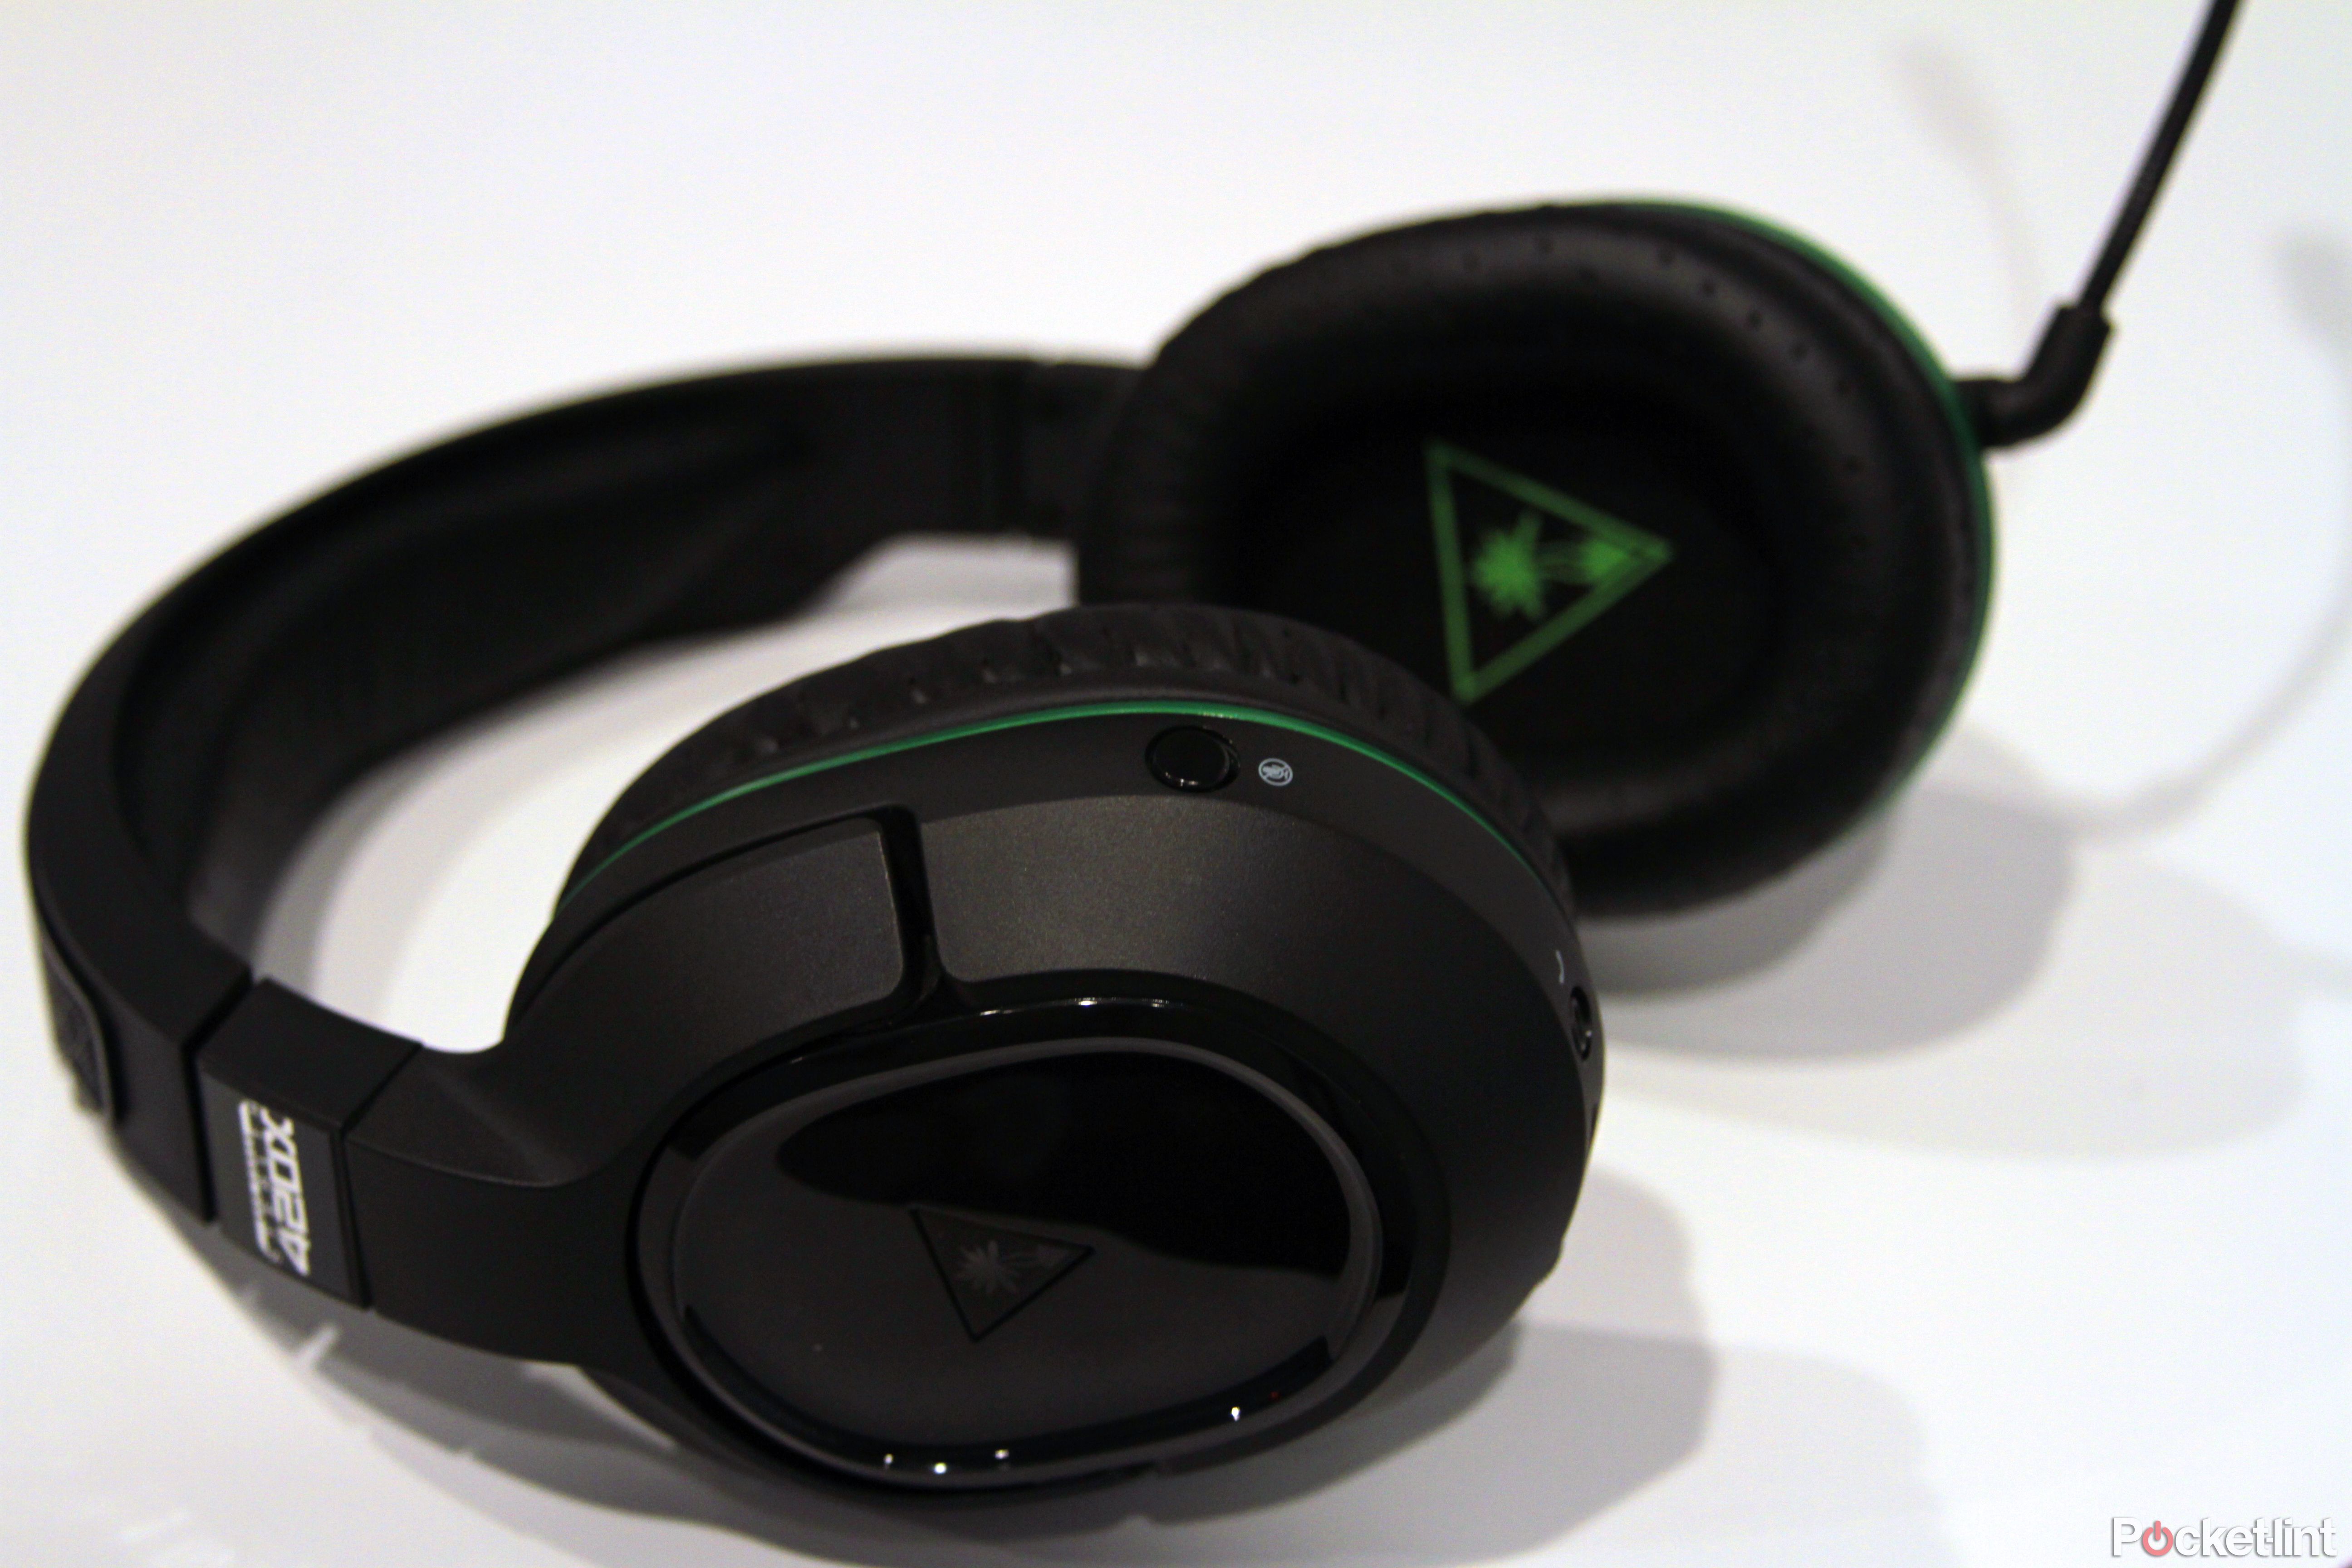 turtle beach s new lineup of gaming headsets for xbox one ps4 and pcs eyes on  image 1